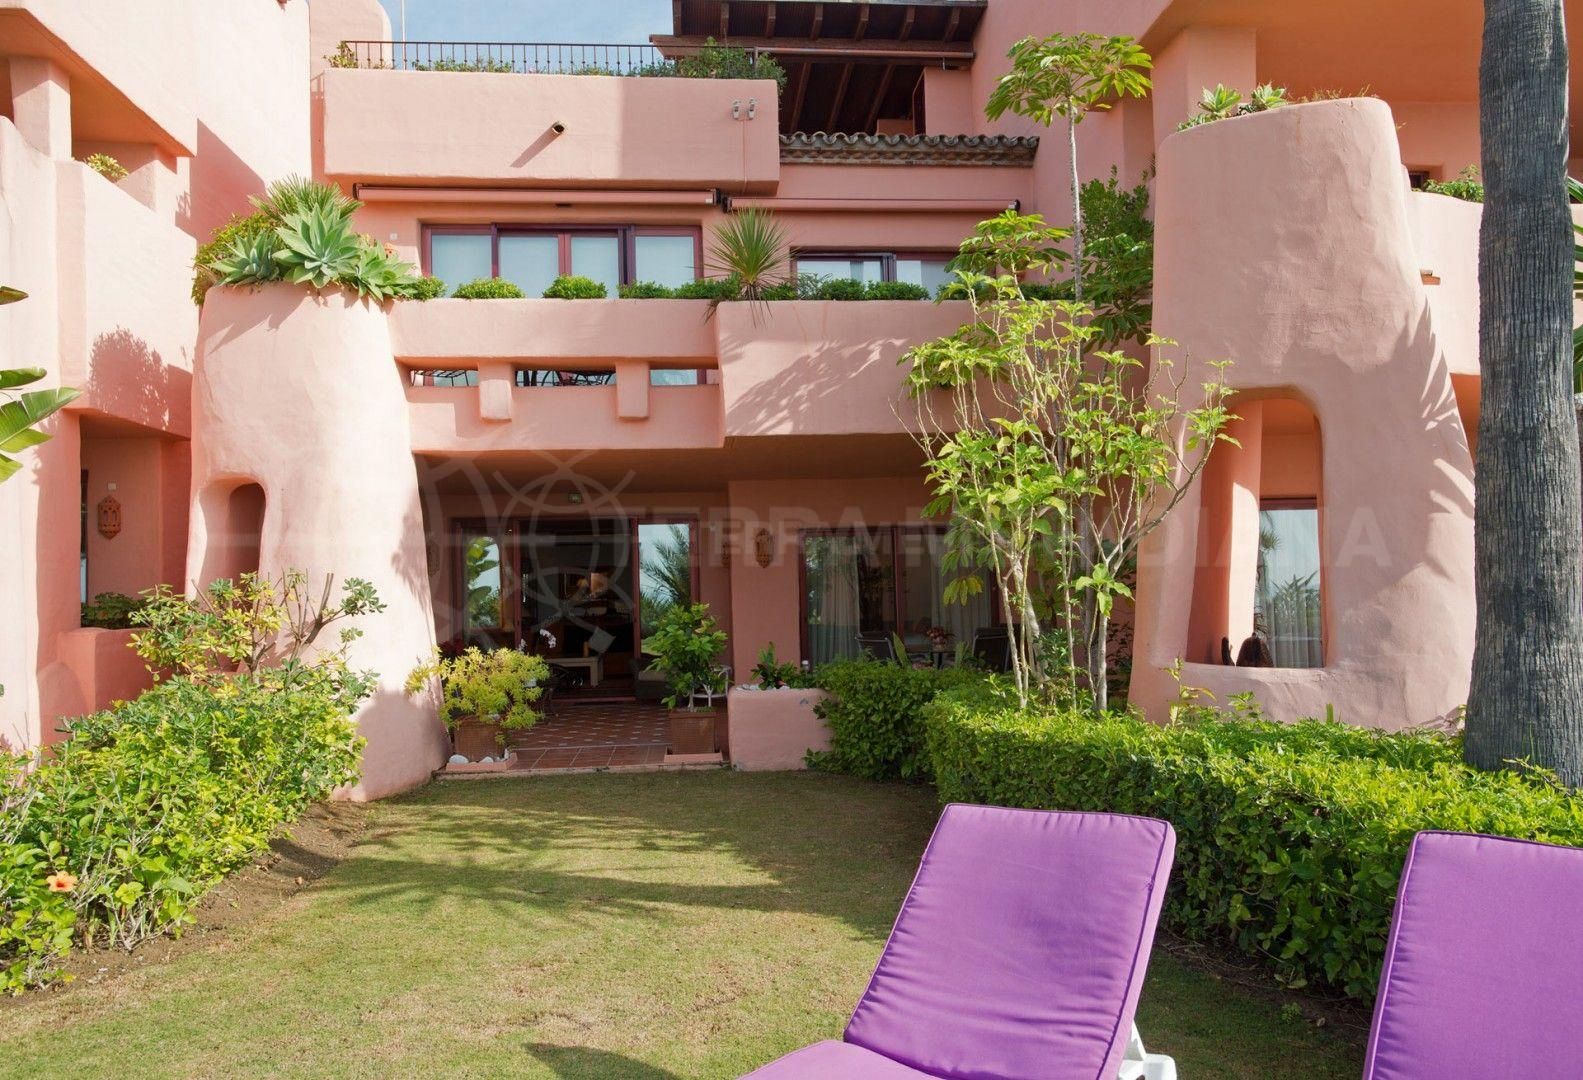 A ground-floor apartment sold by Terra Meridiana in Cabo Bermejo, Estepona